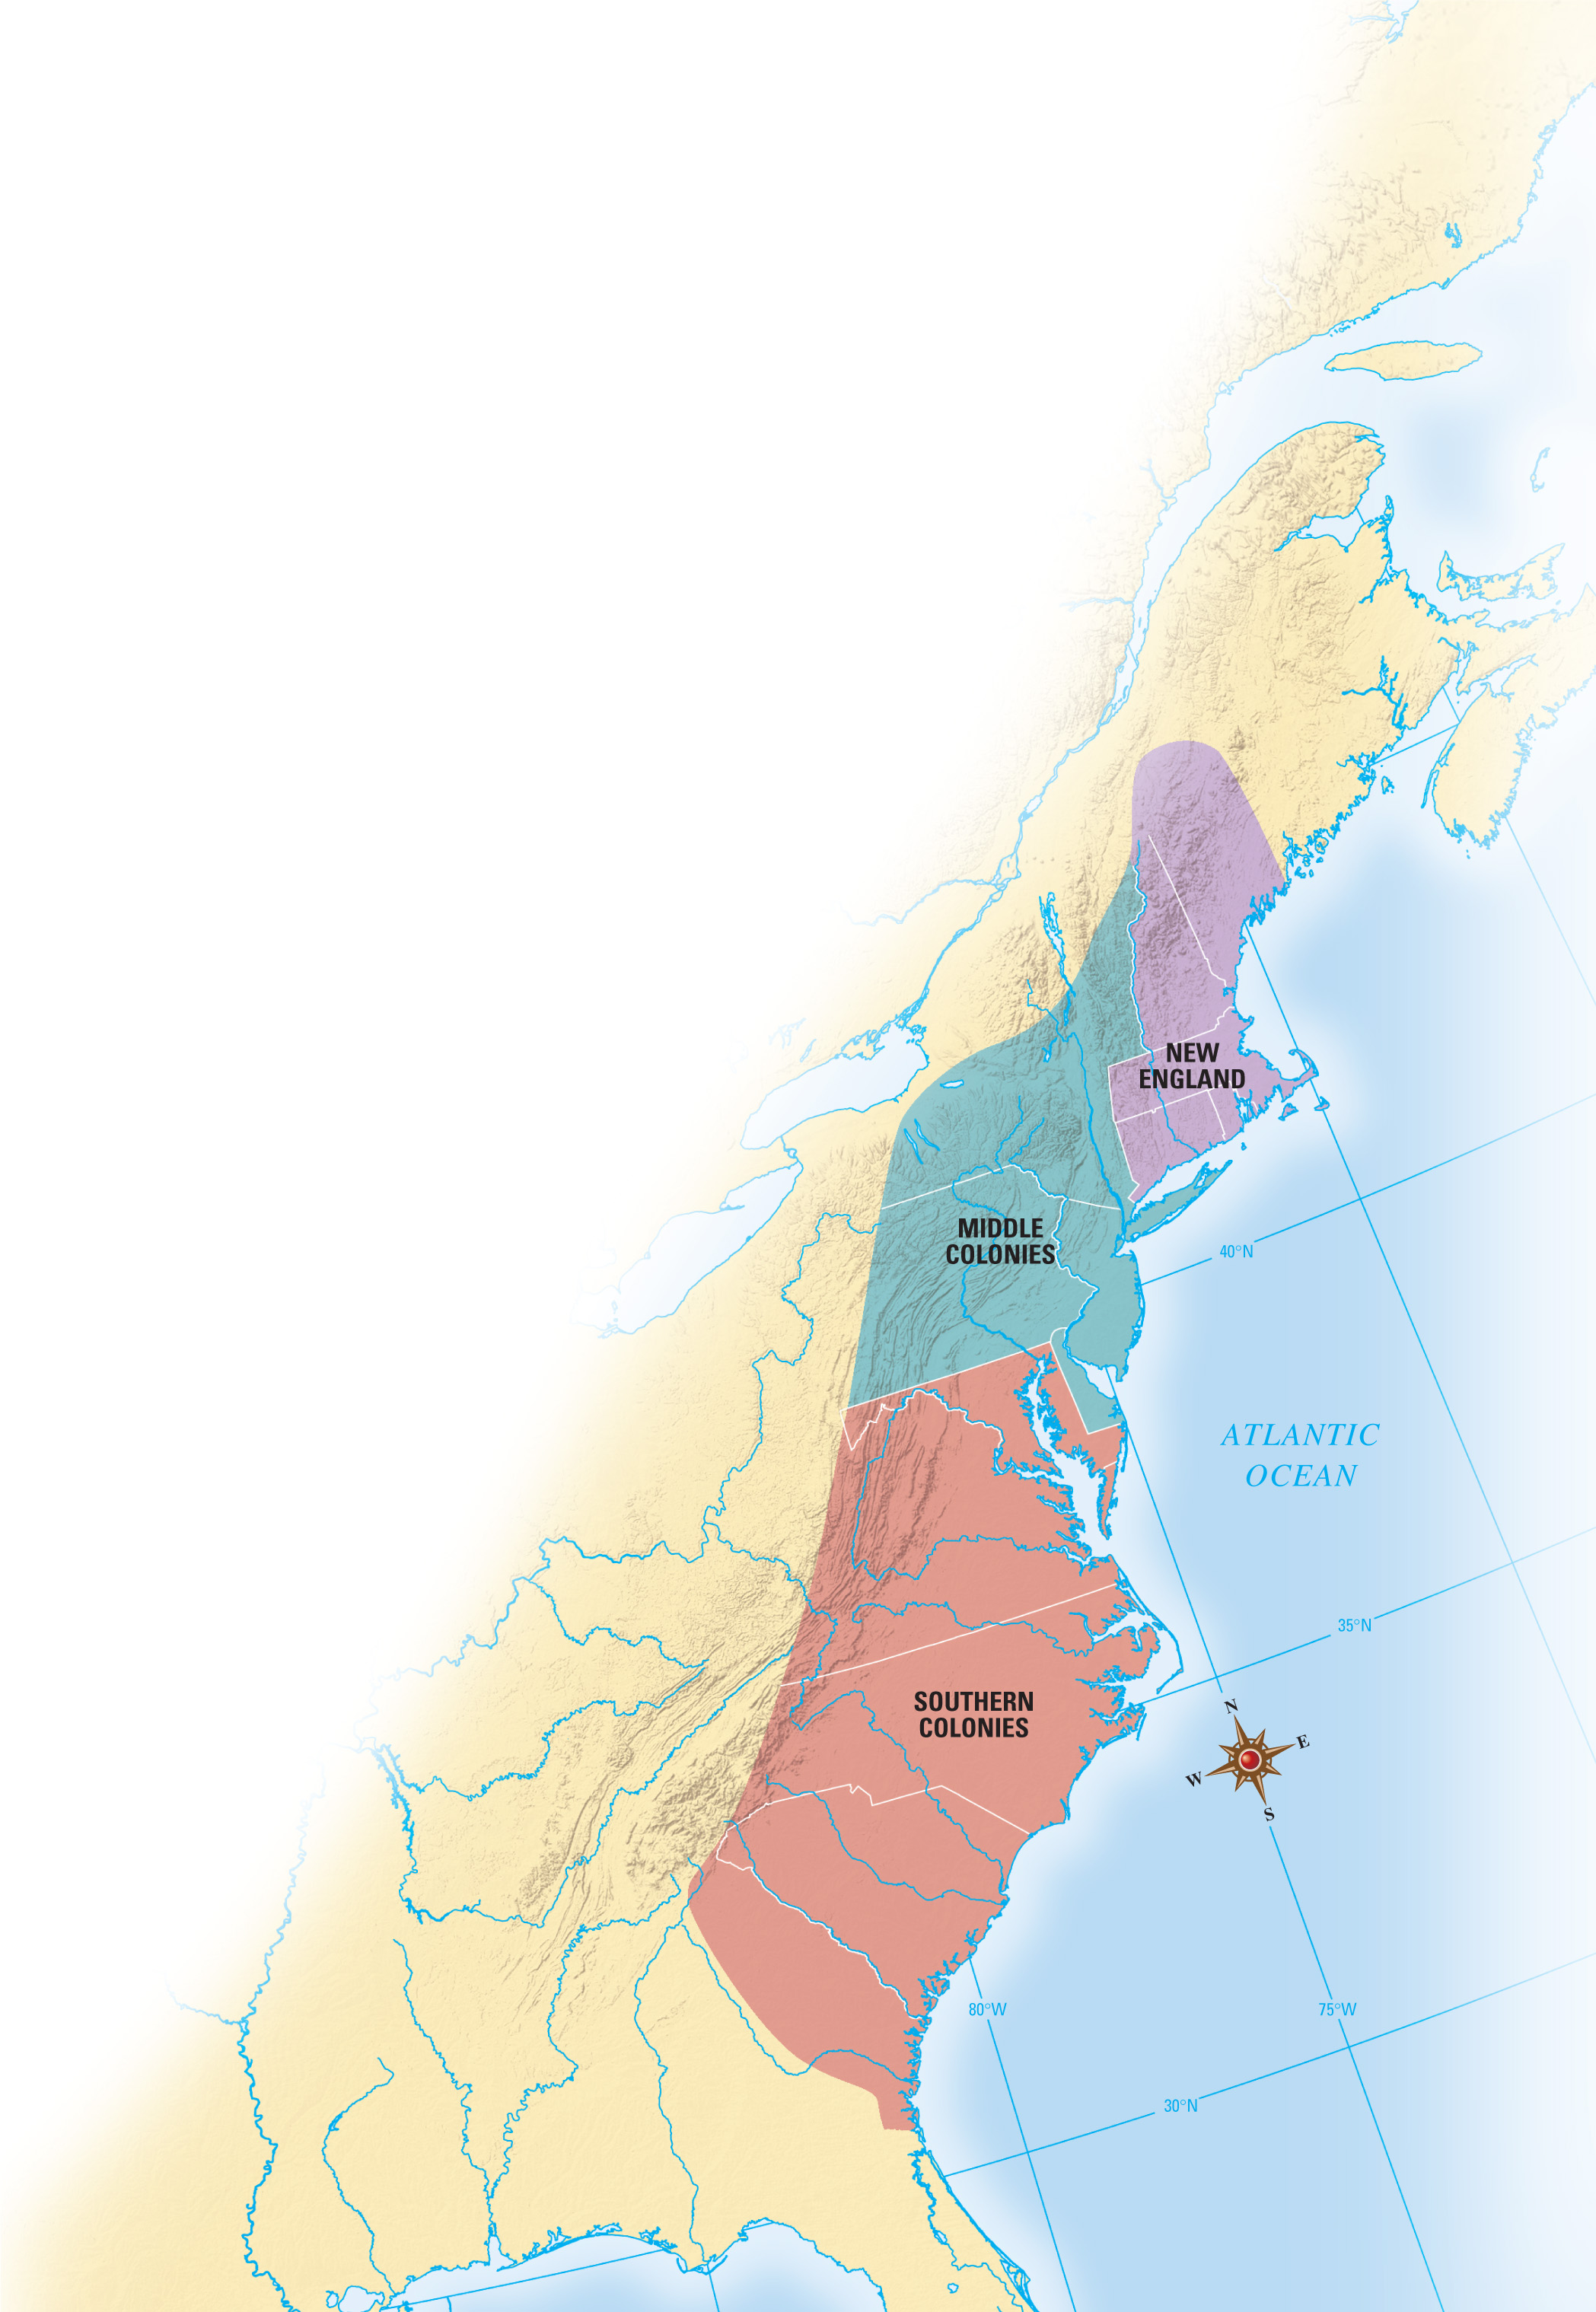 A map shows New England, the Middle Colonies, and the Southern colonies.